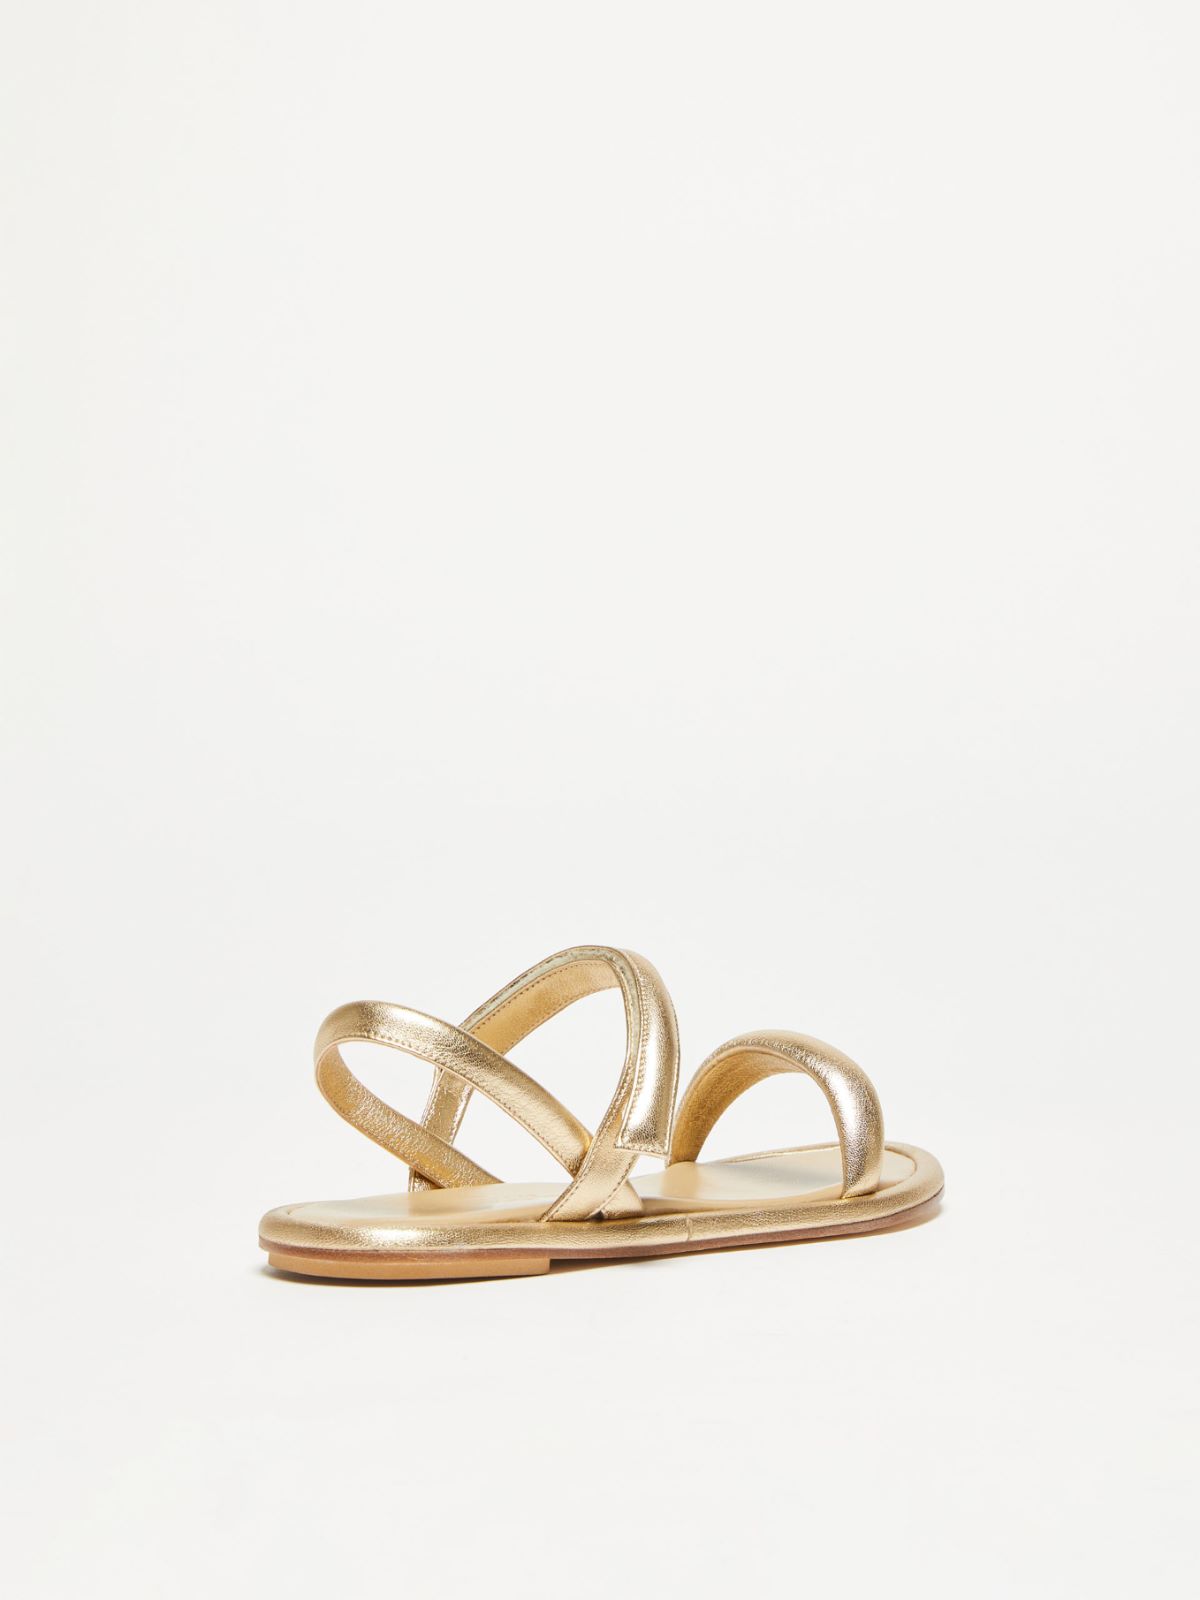 Sandals in nappa leather - GOLD - Weekend Max Mara - 3